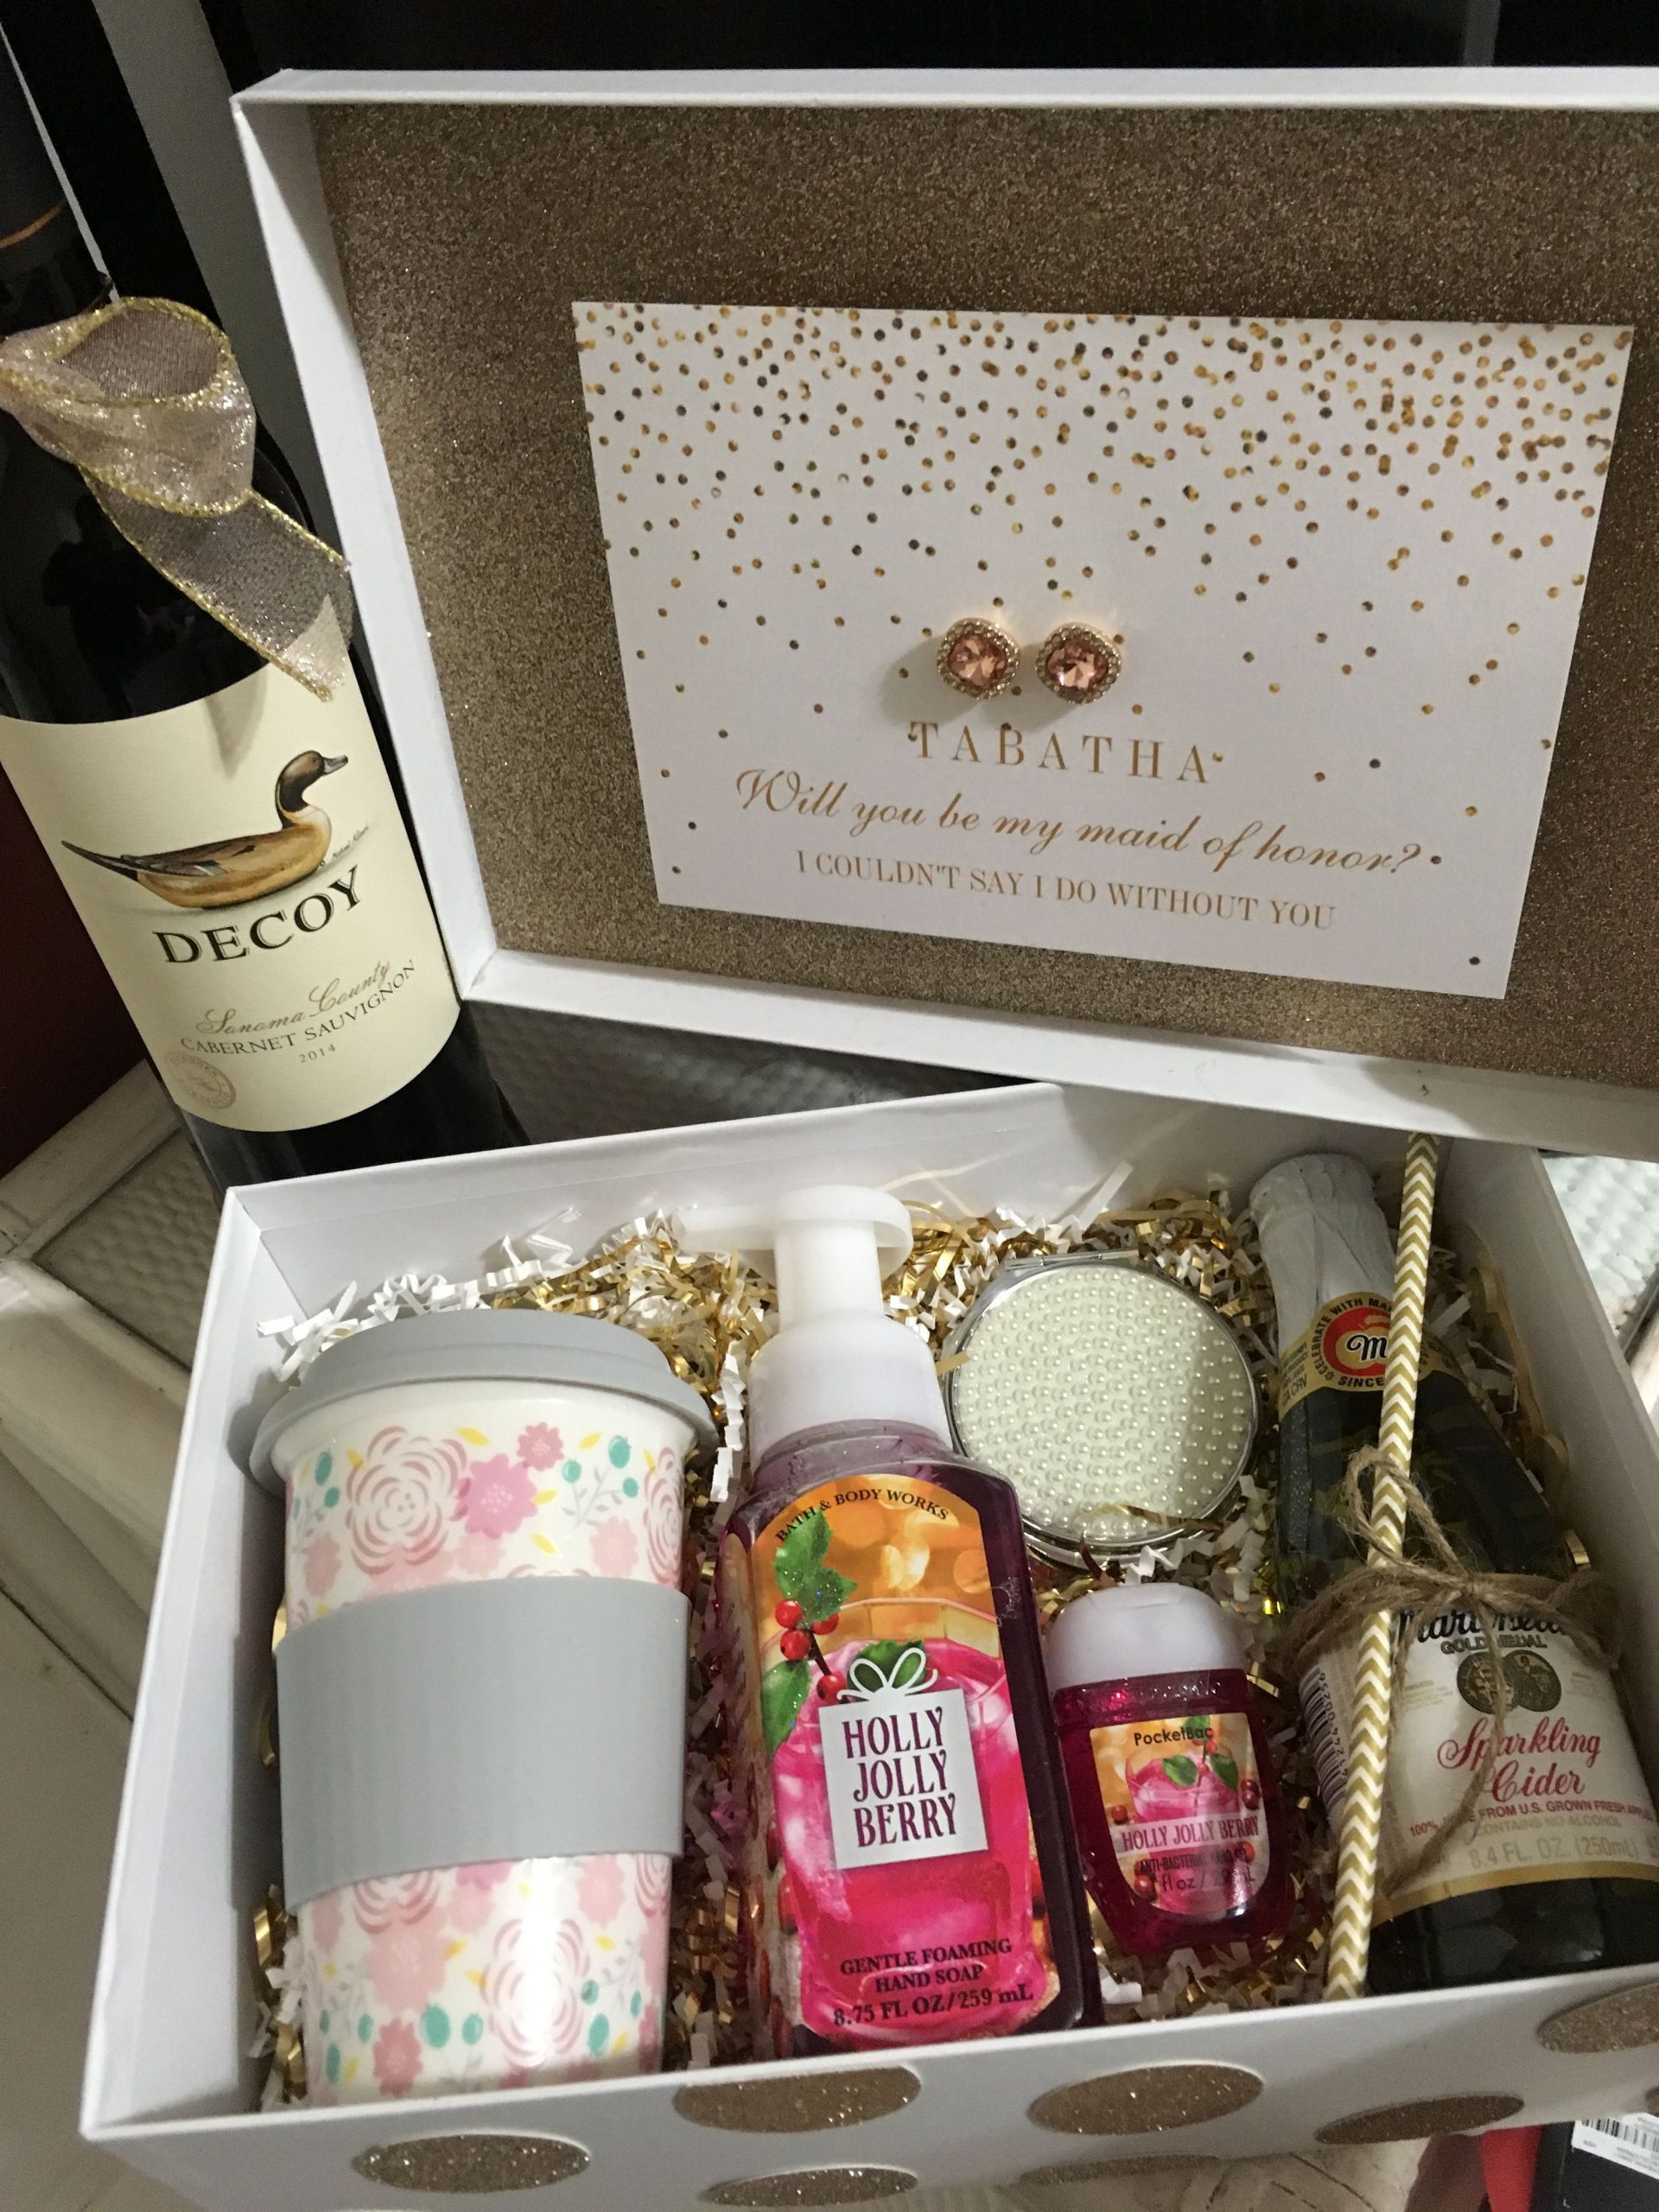 Engagement Party Gift Ideas From Maid Of Honor
 My maid of honors proposal box She LOVED it Earrings